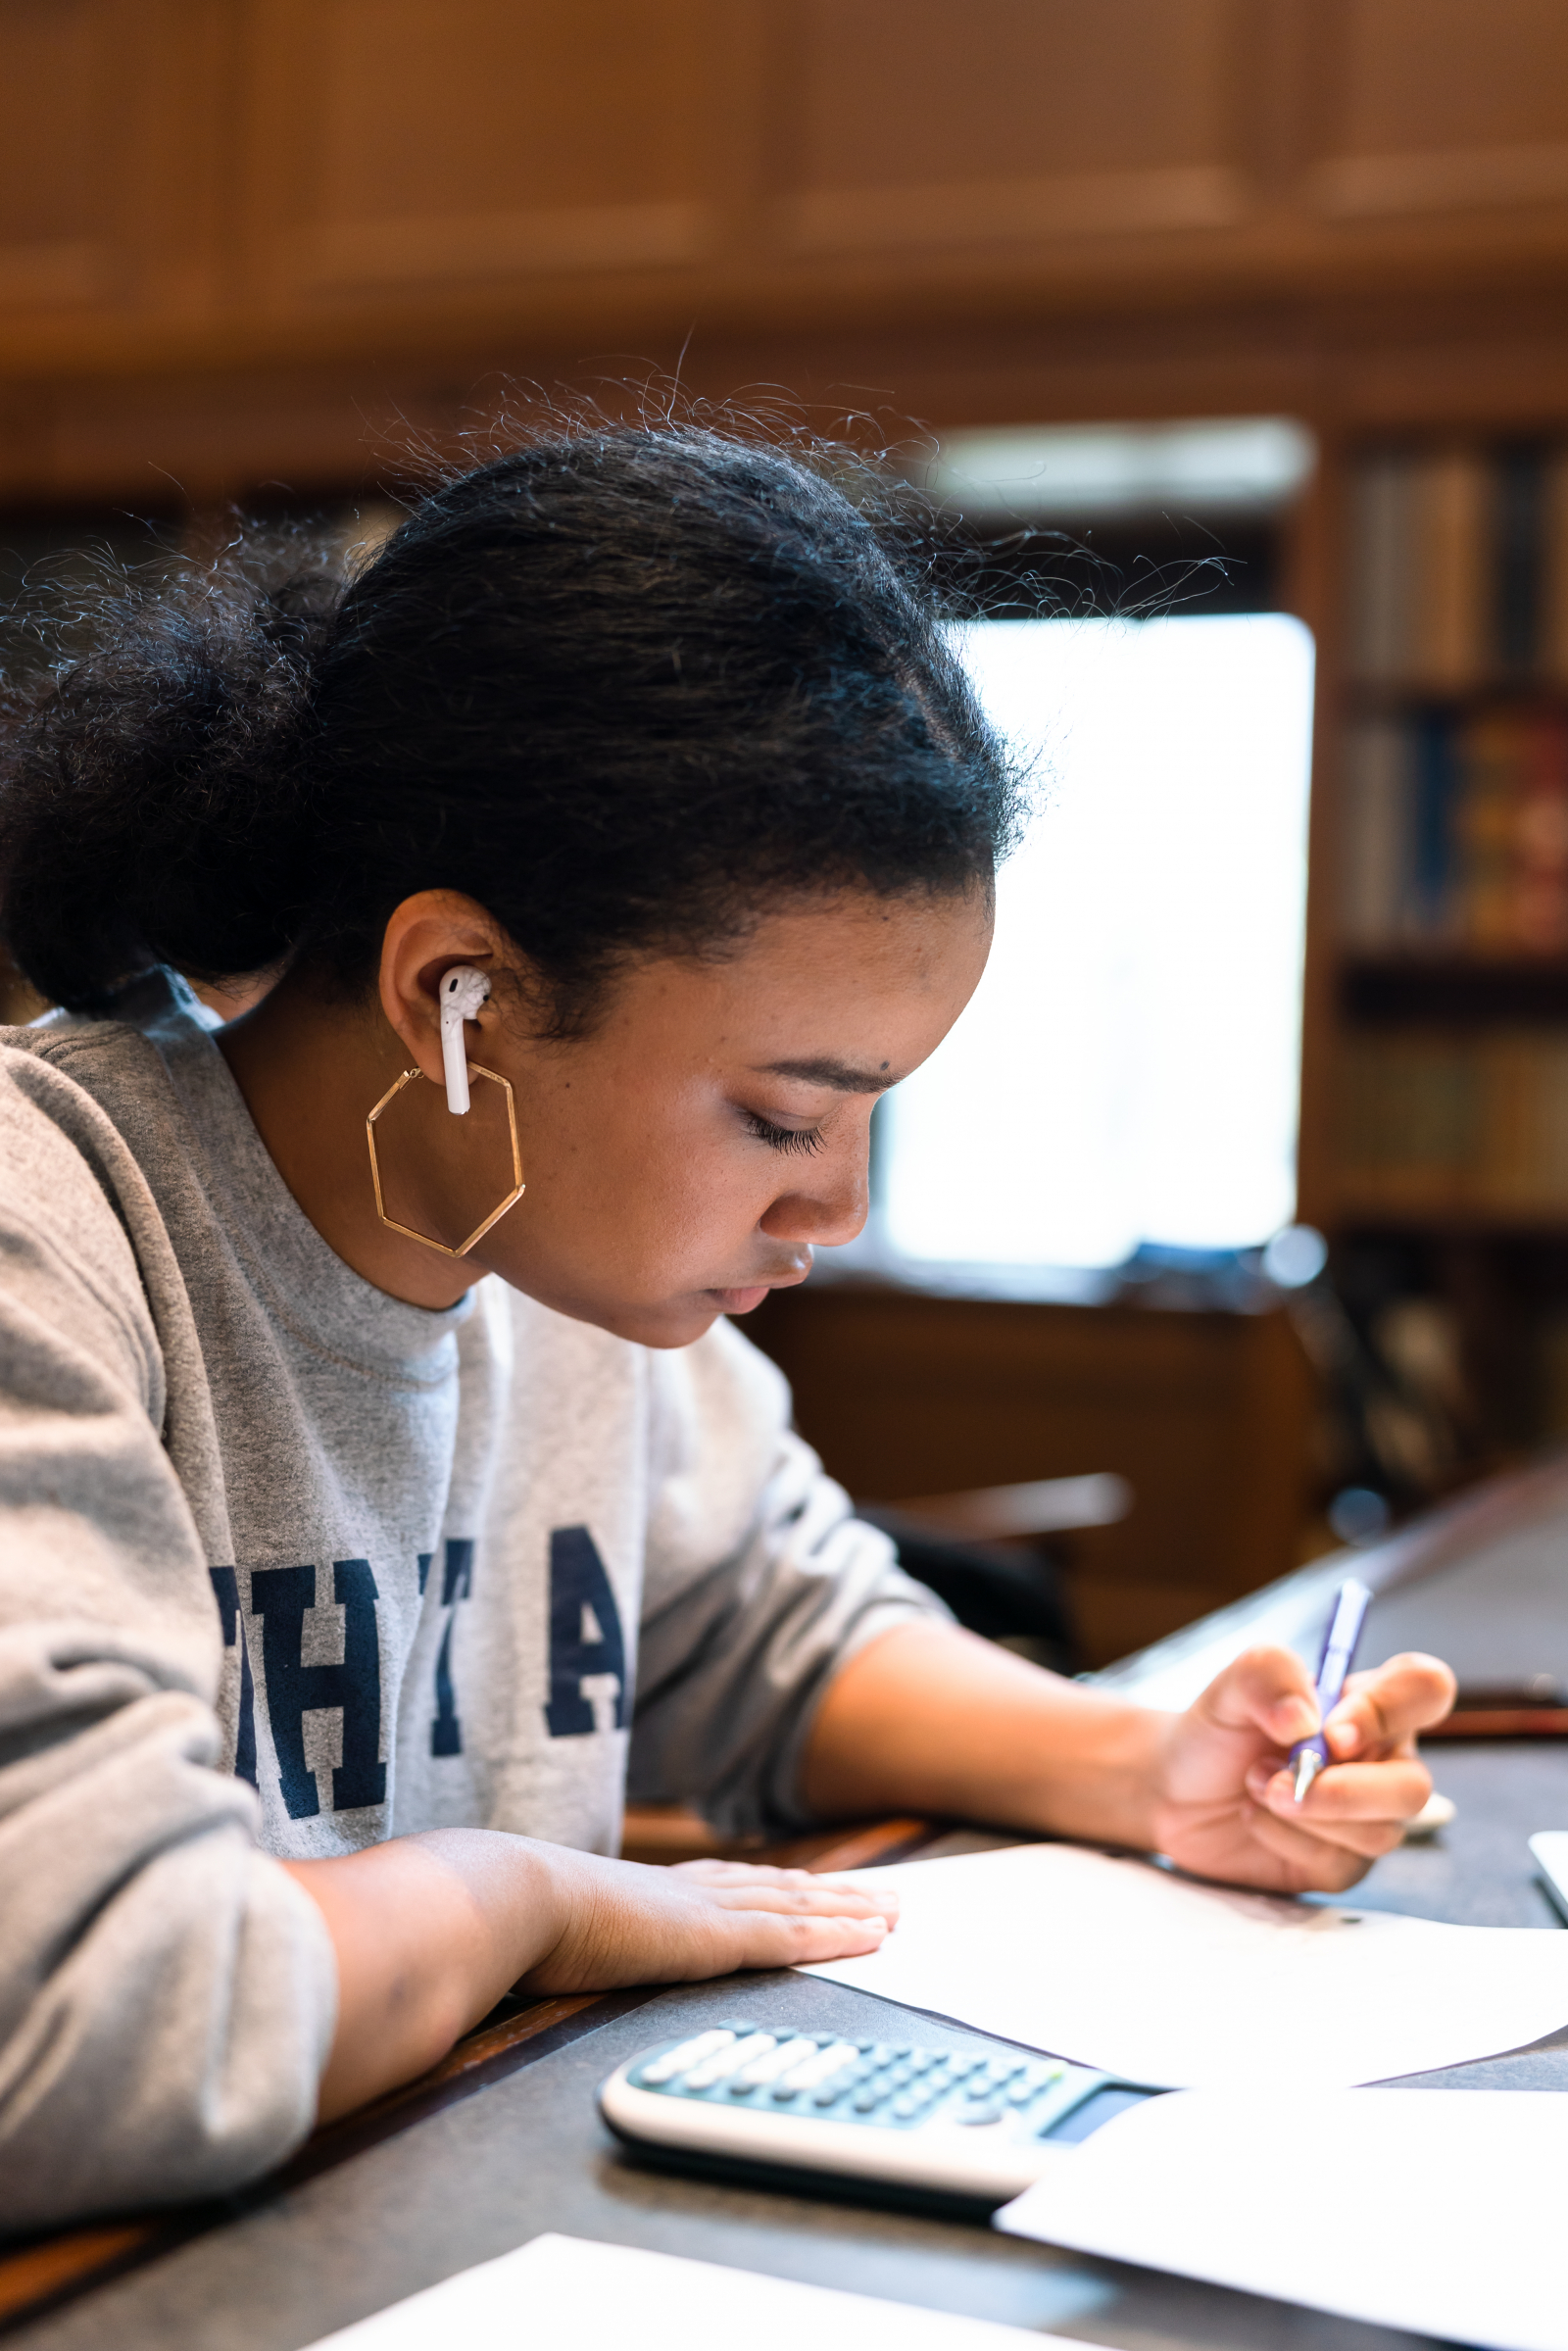 Student sits at a desk in the library with headphones in studying.